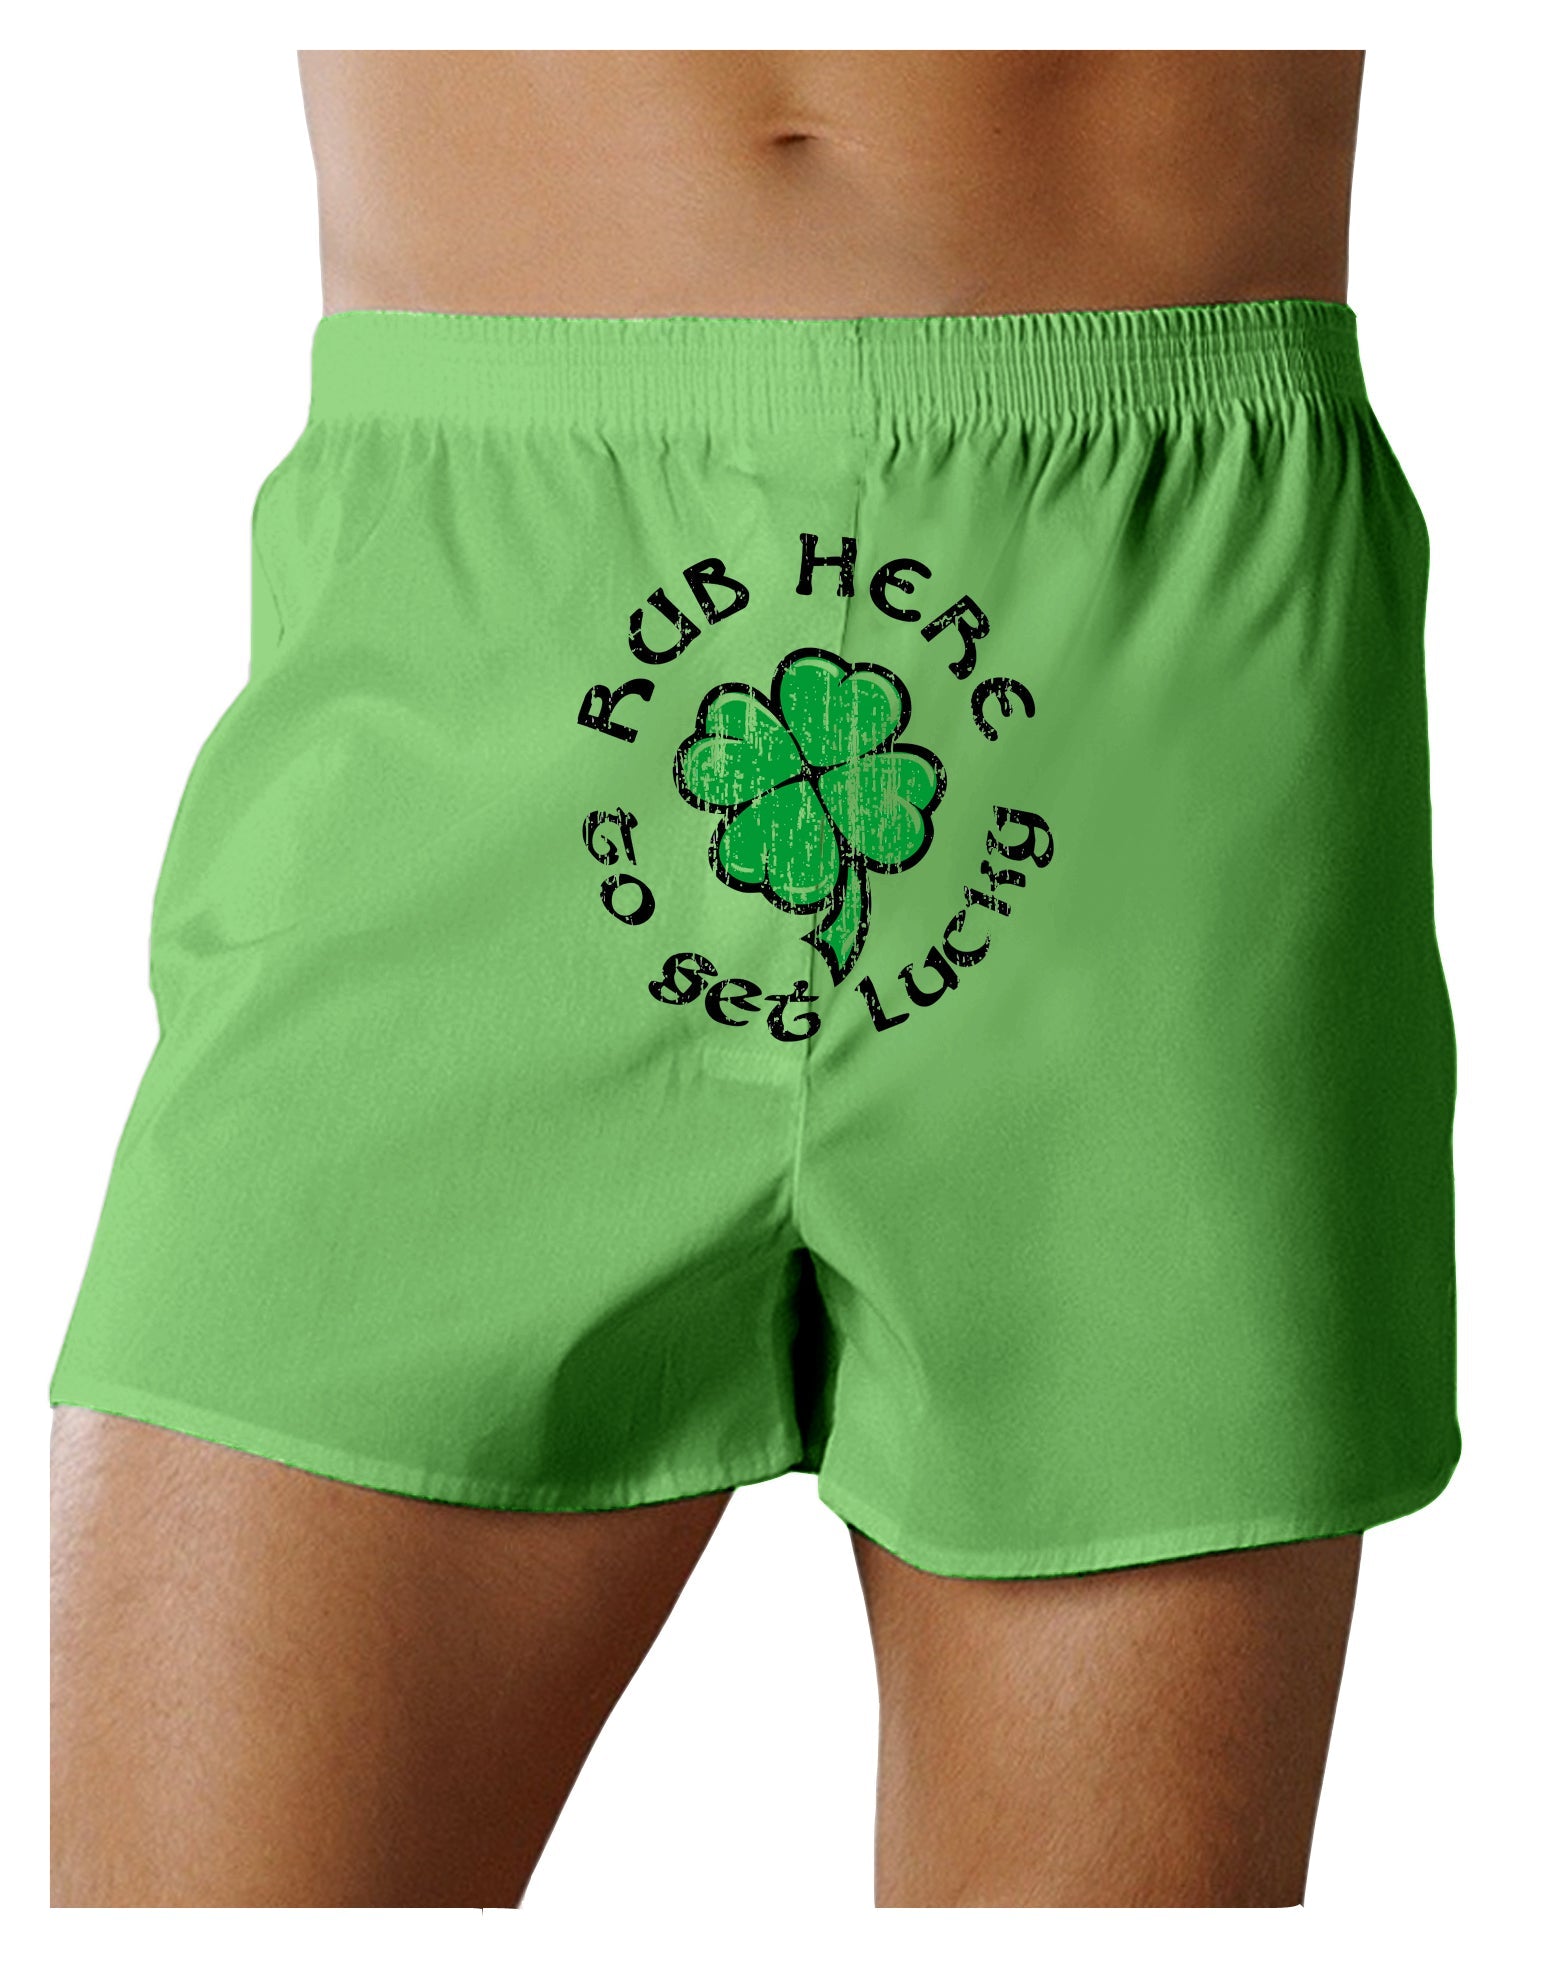 Rub Here For Good Luck Funny Valentine's Day boxer Funny Underwear For Men  Gift